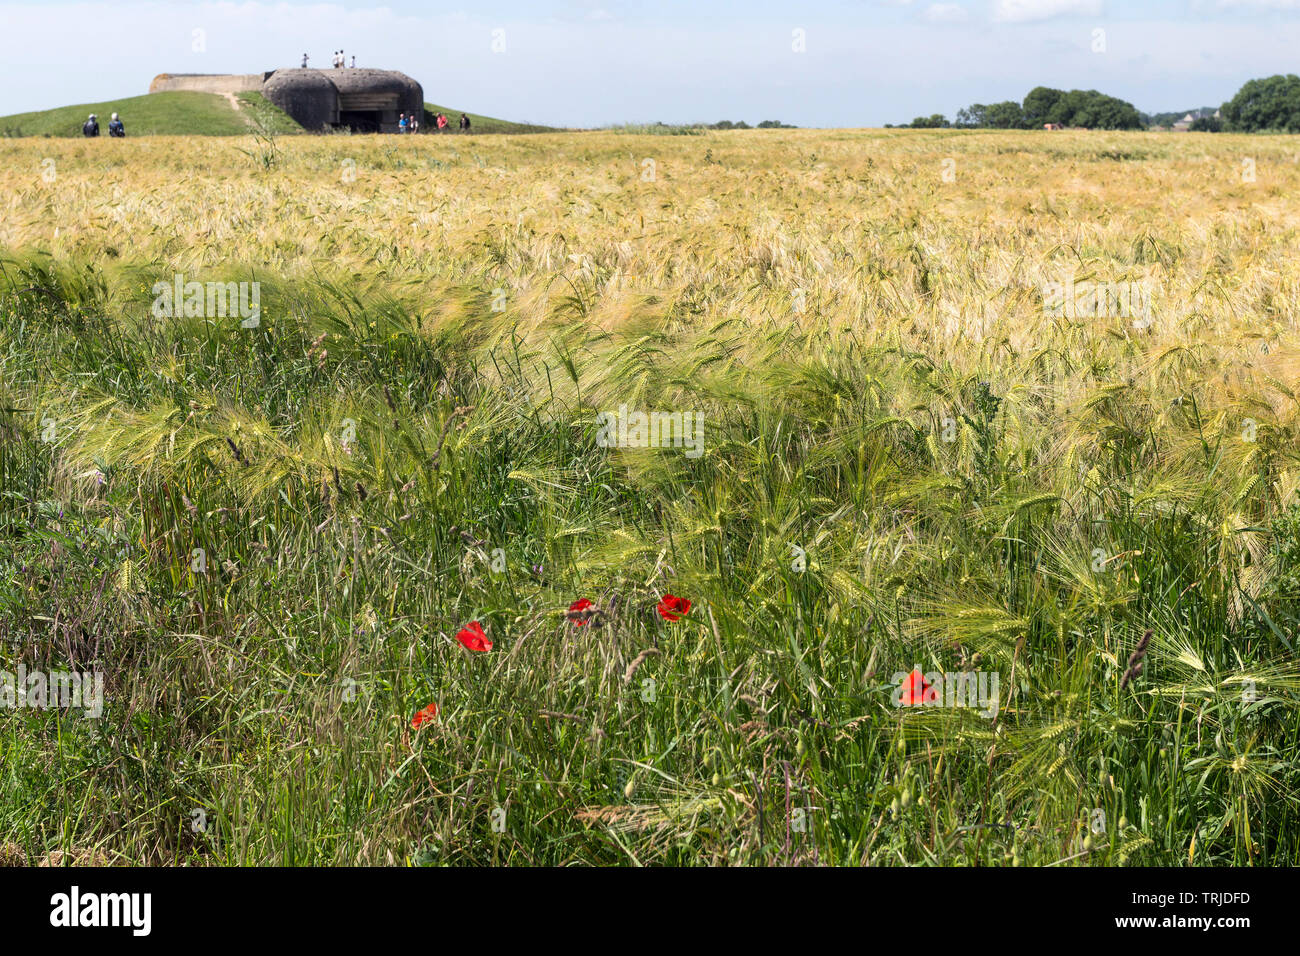 Poppies in a Field of Windblown Wheat in Front of the Longues-sur-Mer Gun Battery West of Arromanches-les-Bains, Normandy Coast, France, EU Stock Photo